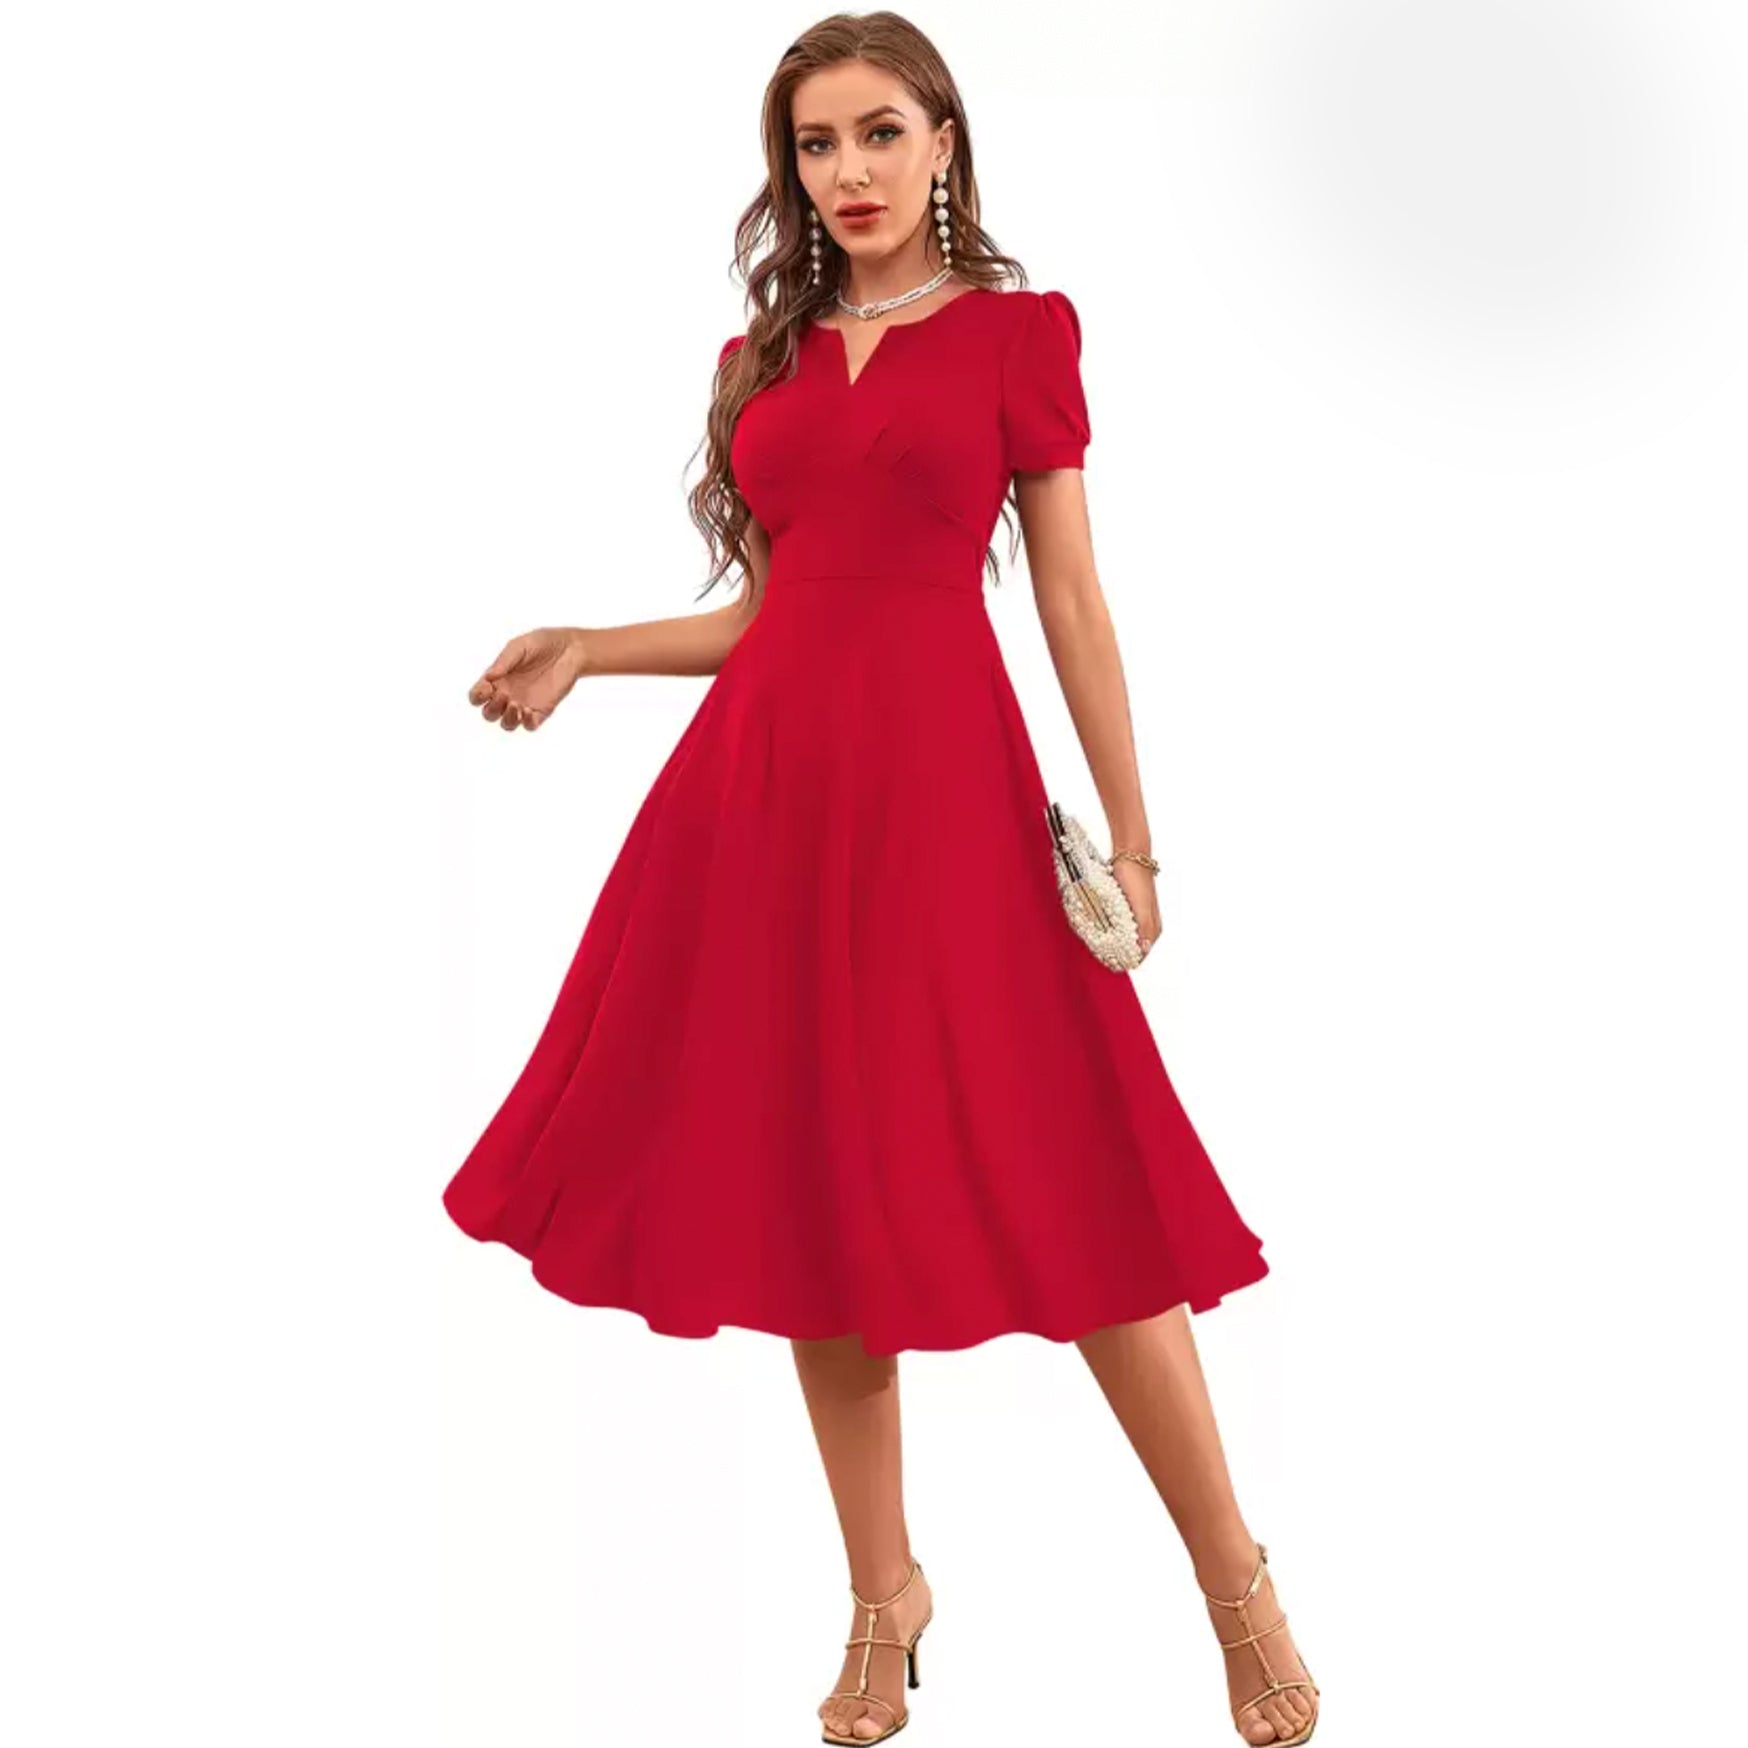 TESSAVEGAS Women Fit and Flare Red Dress